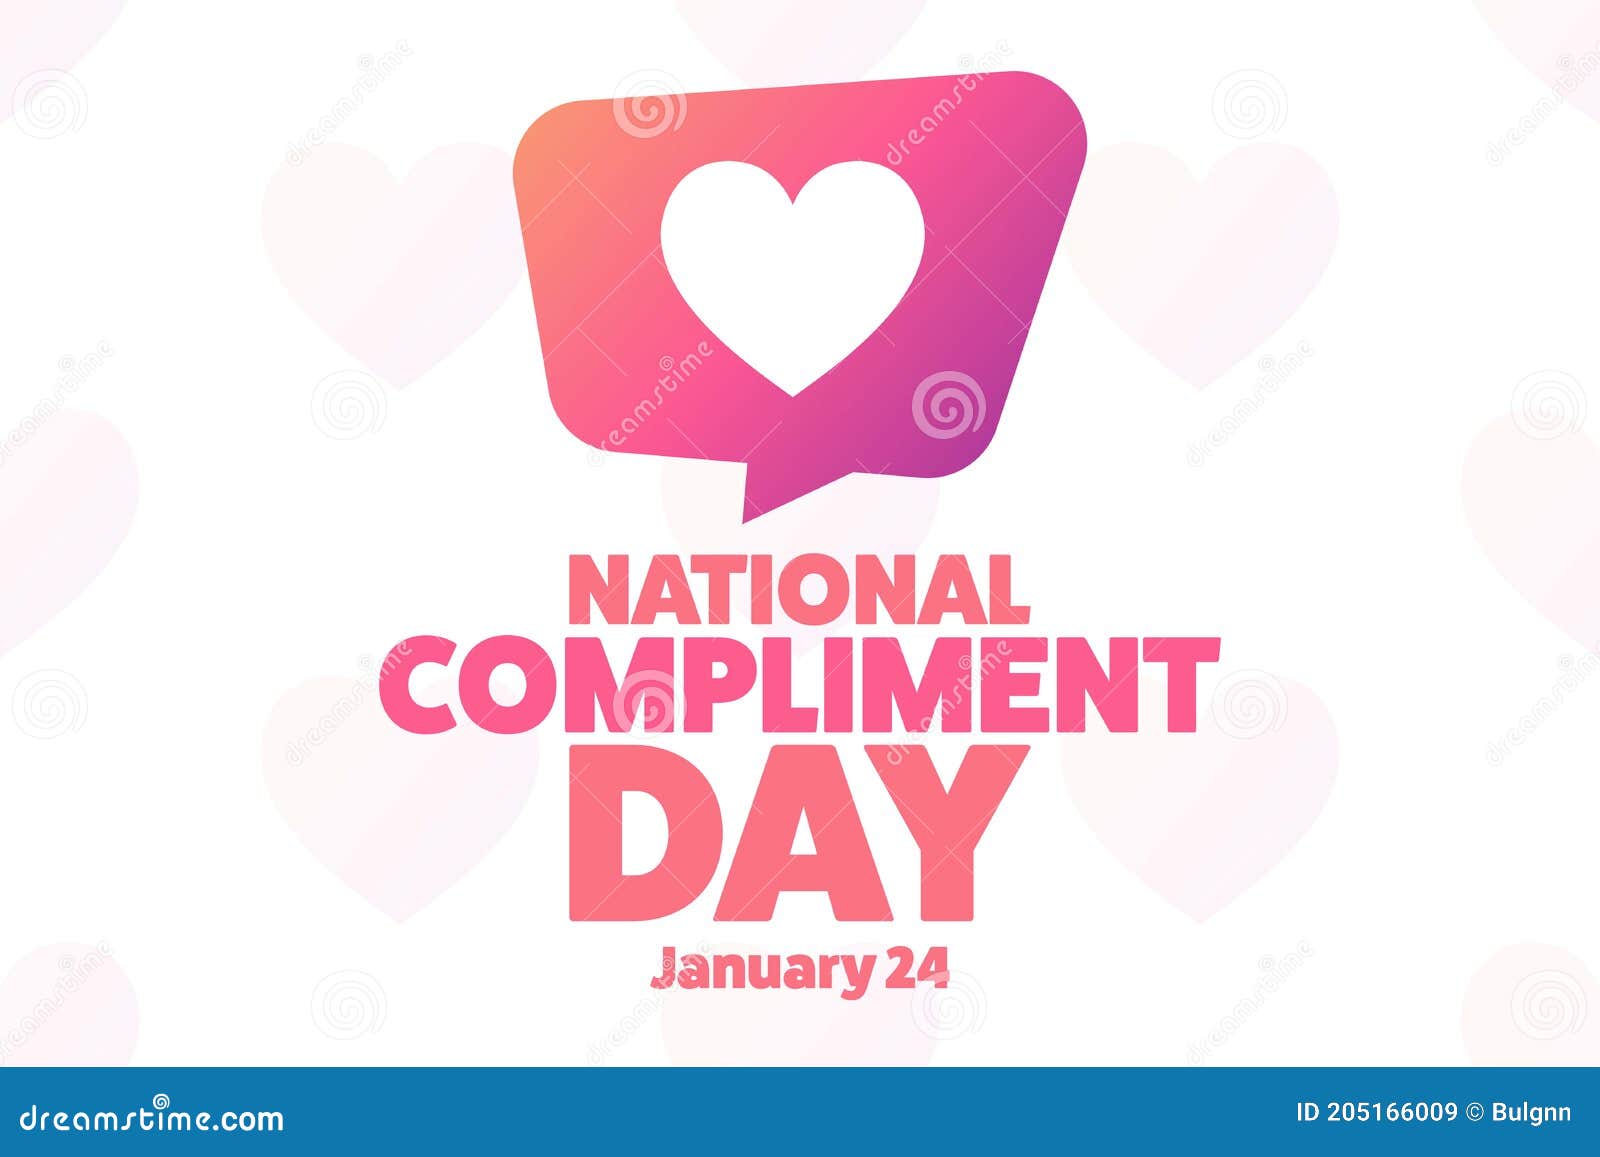 national compliment day. january 24. holiday concept. template for background, banner, card, poster with text